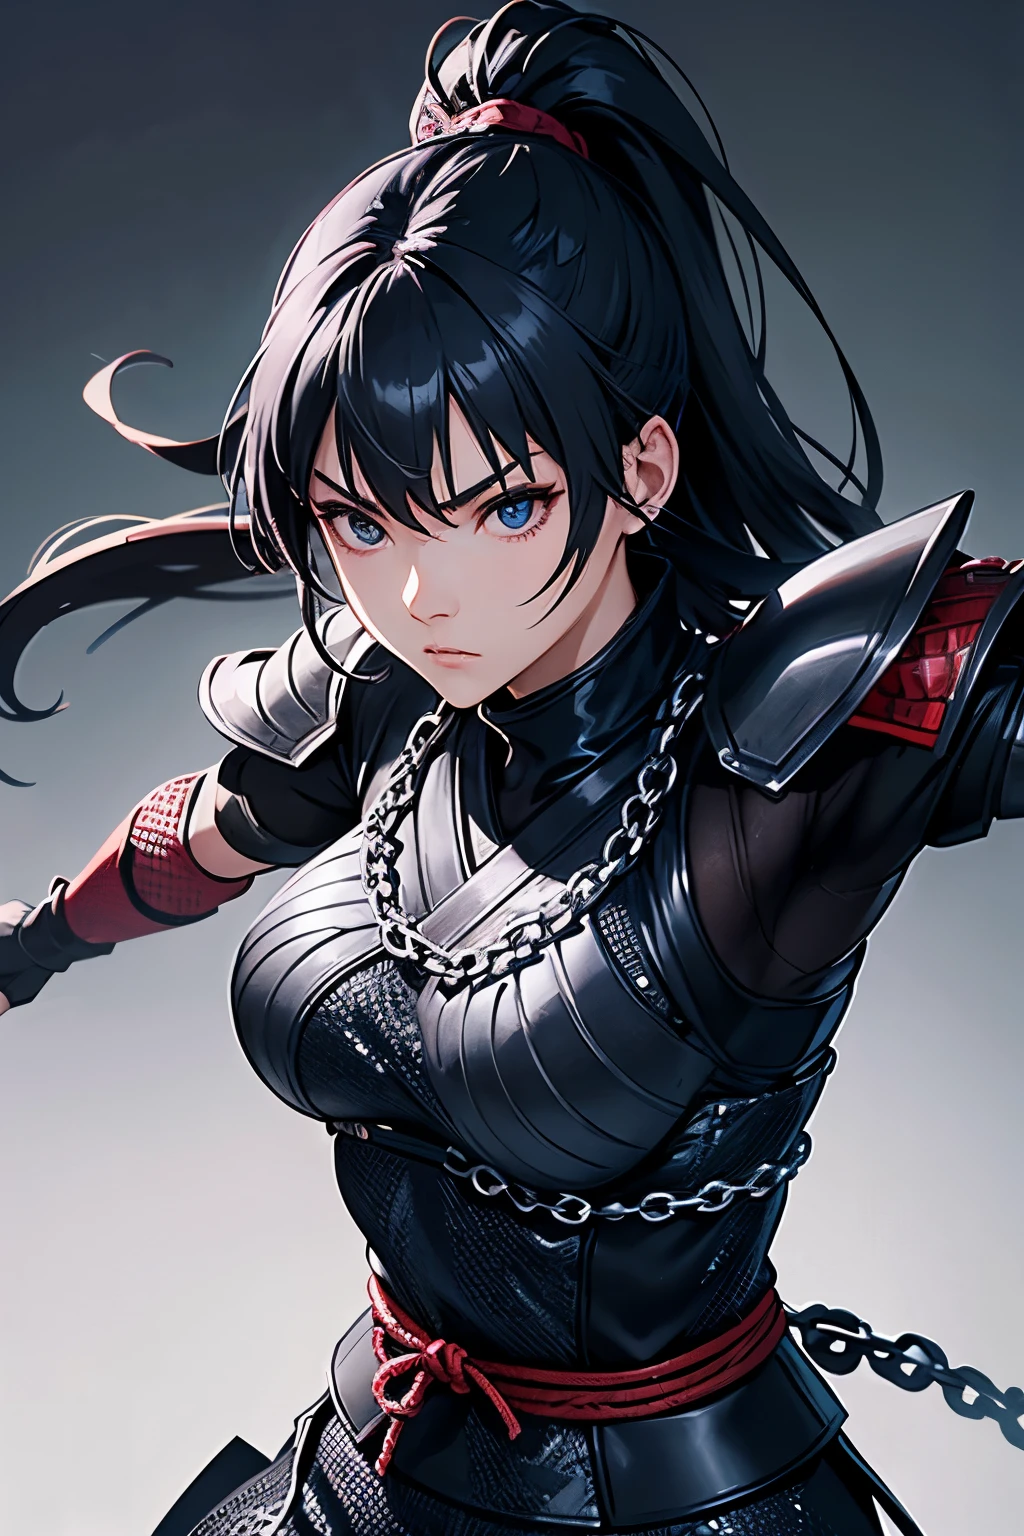 Japanese Ninja Girl、Wearing chain mail combat gear、alone、Beautiful and dignified face、Fighting pose、A tense composition、Simple Background、4K Anime Art、highest quality、high resolution、masterpiece、